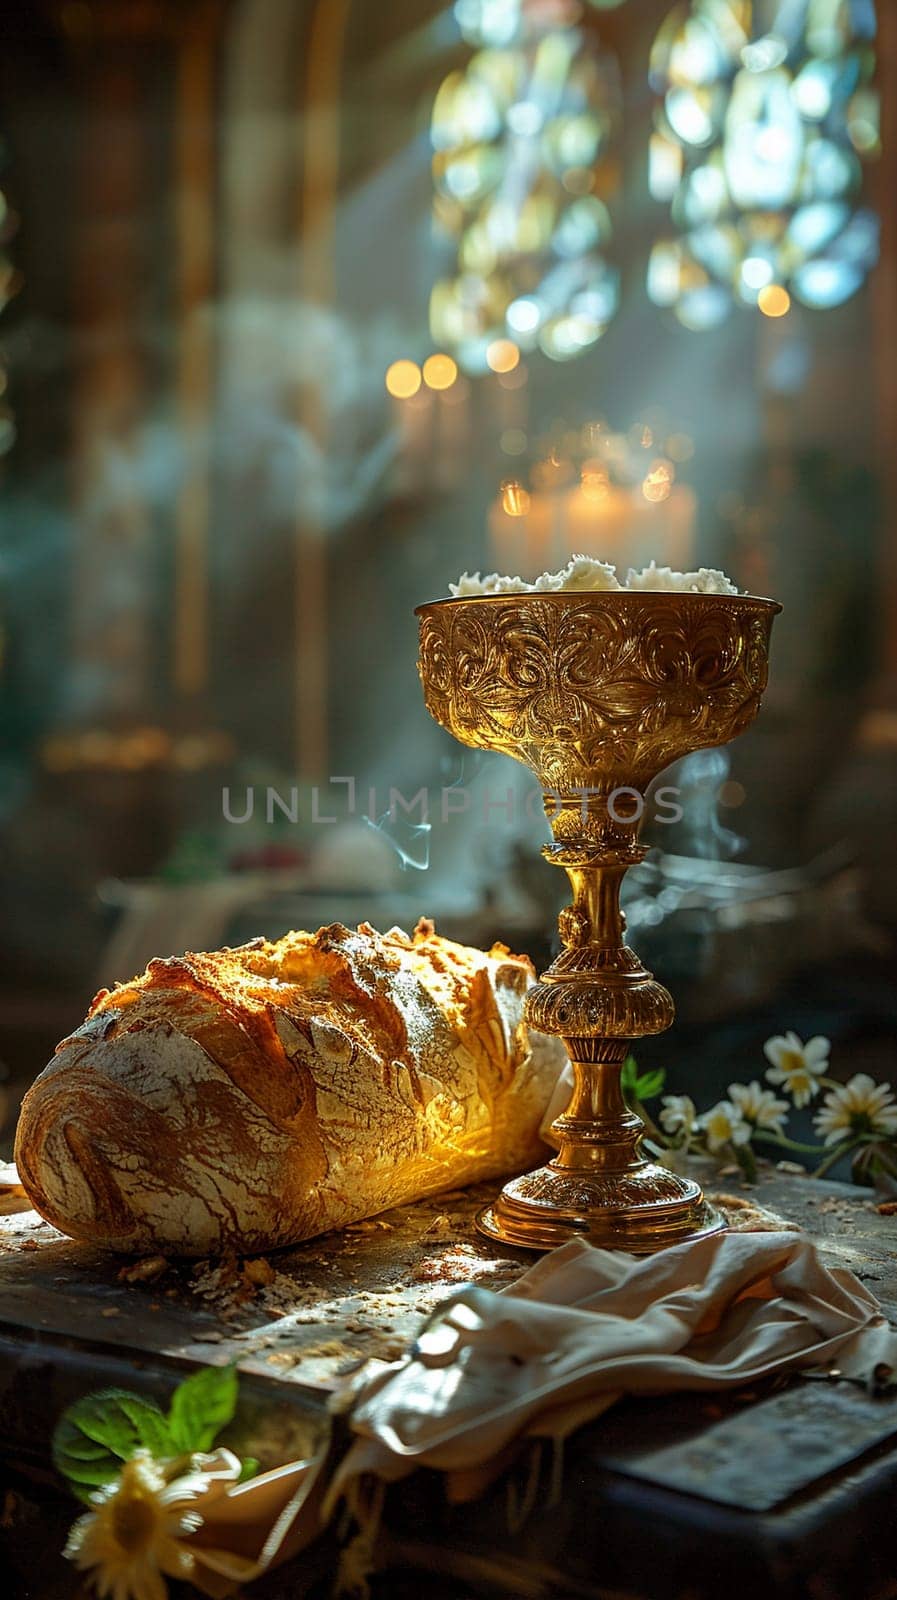 Holy Communion Elements Prepared on an Altar, The bread and wine slightly out of focus, highlighting the sacredness of the ritual.